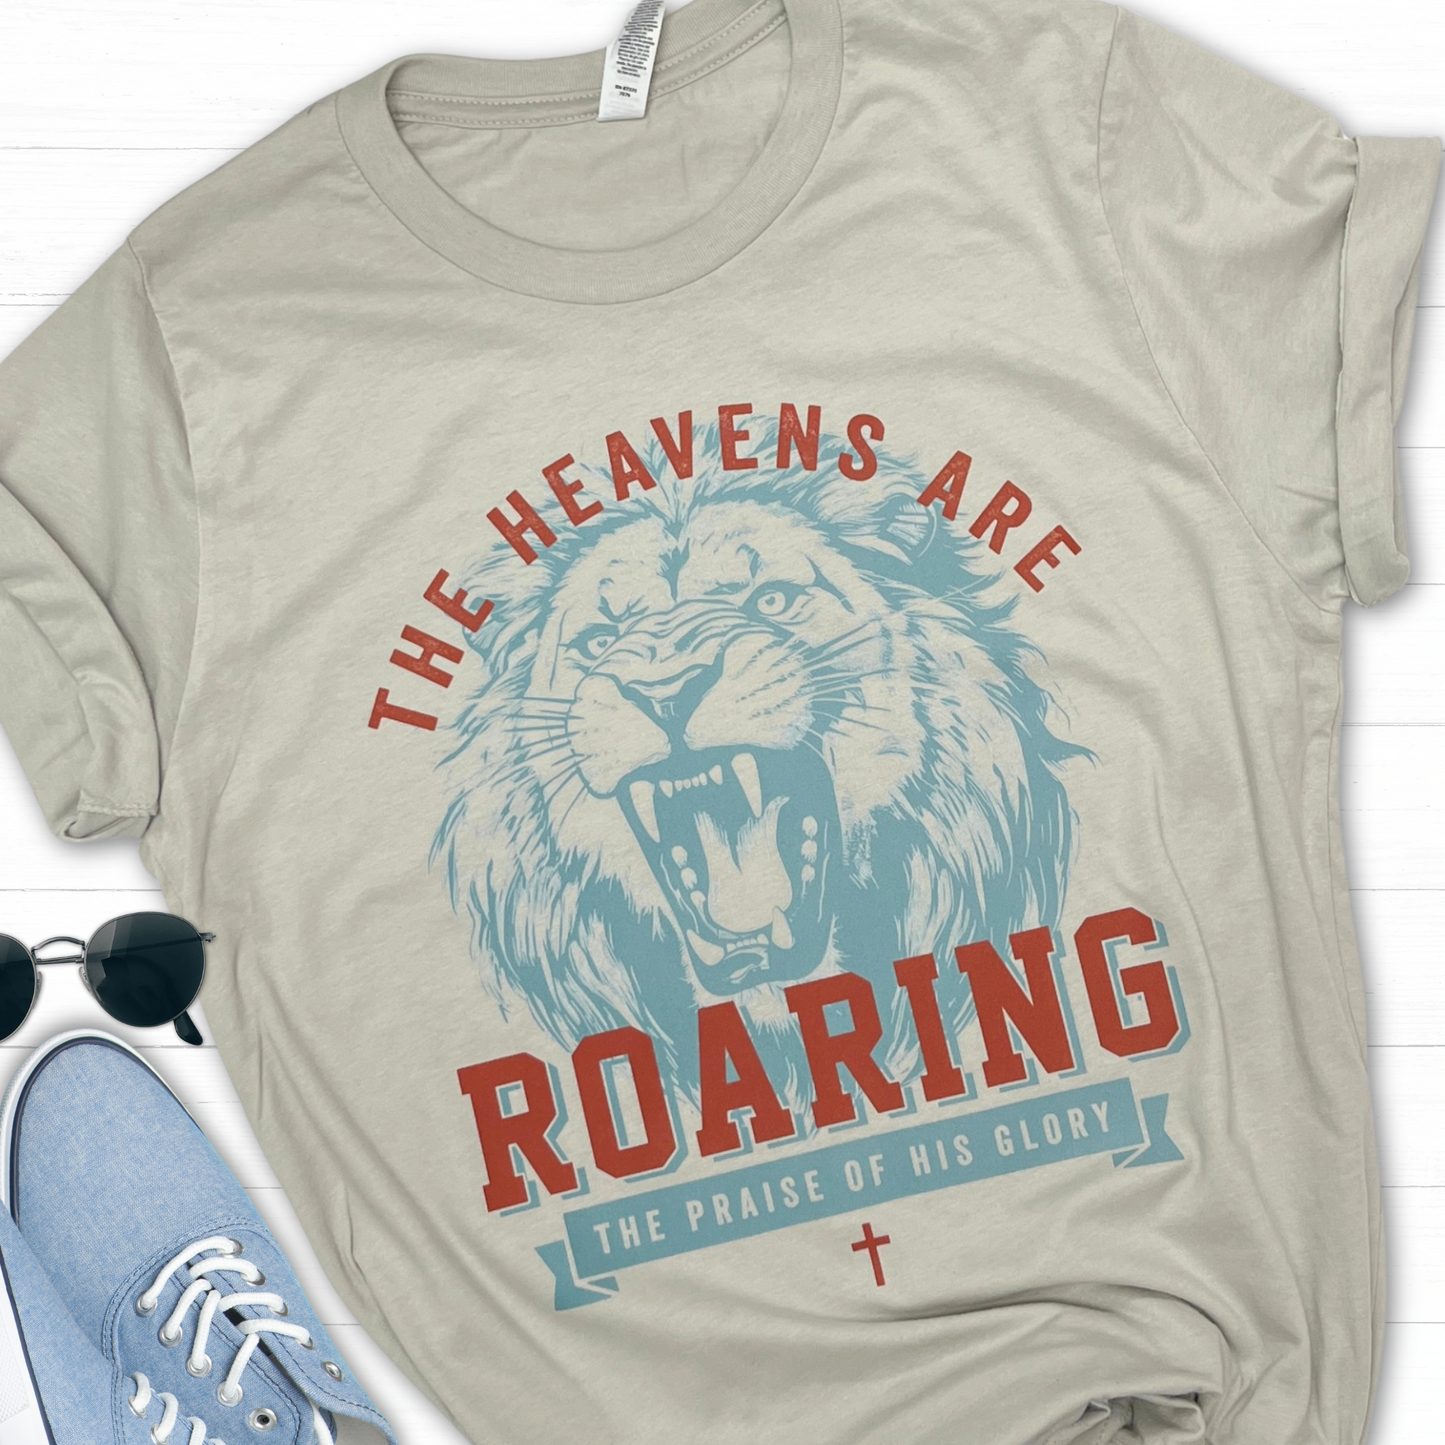 The heavens are roaring (Lion) tee